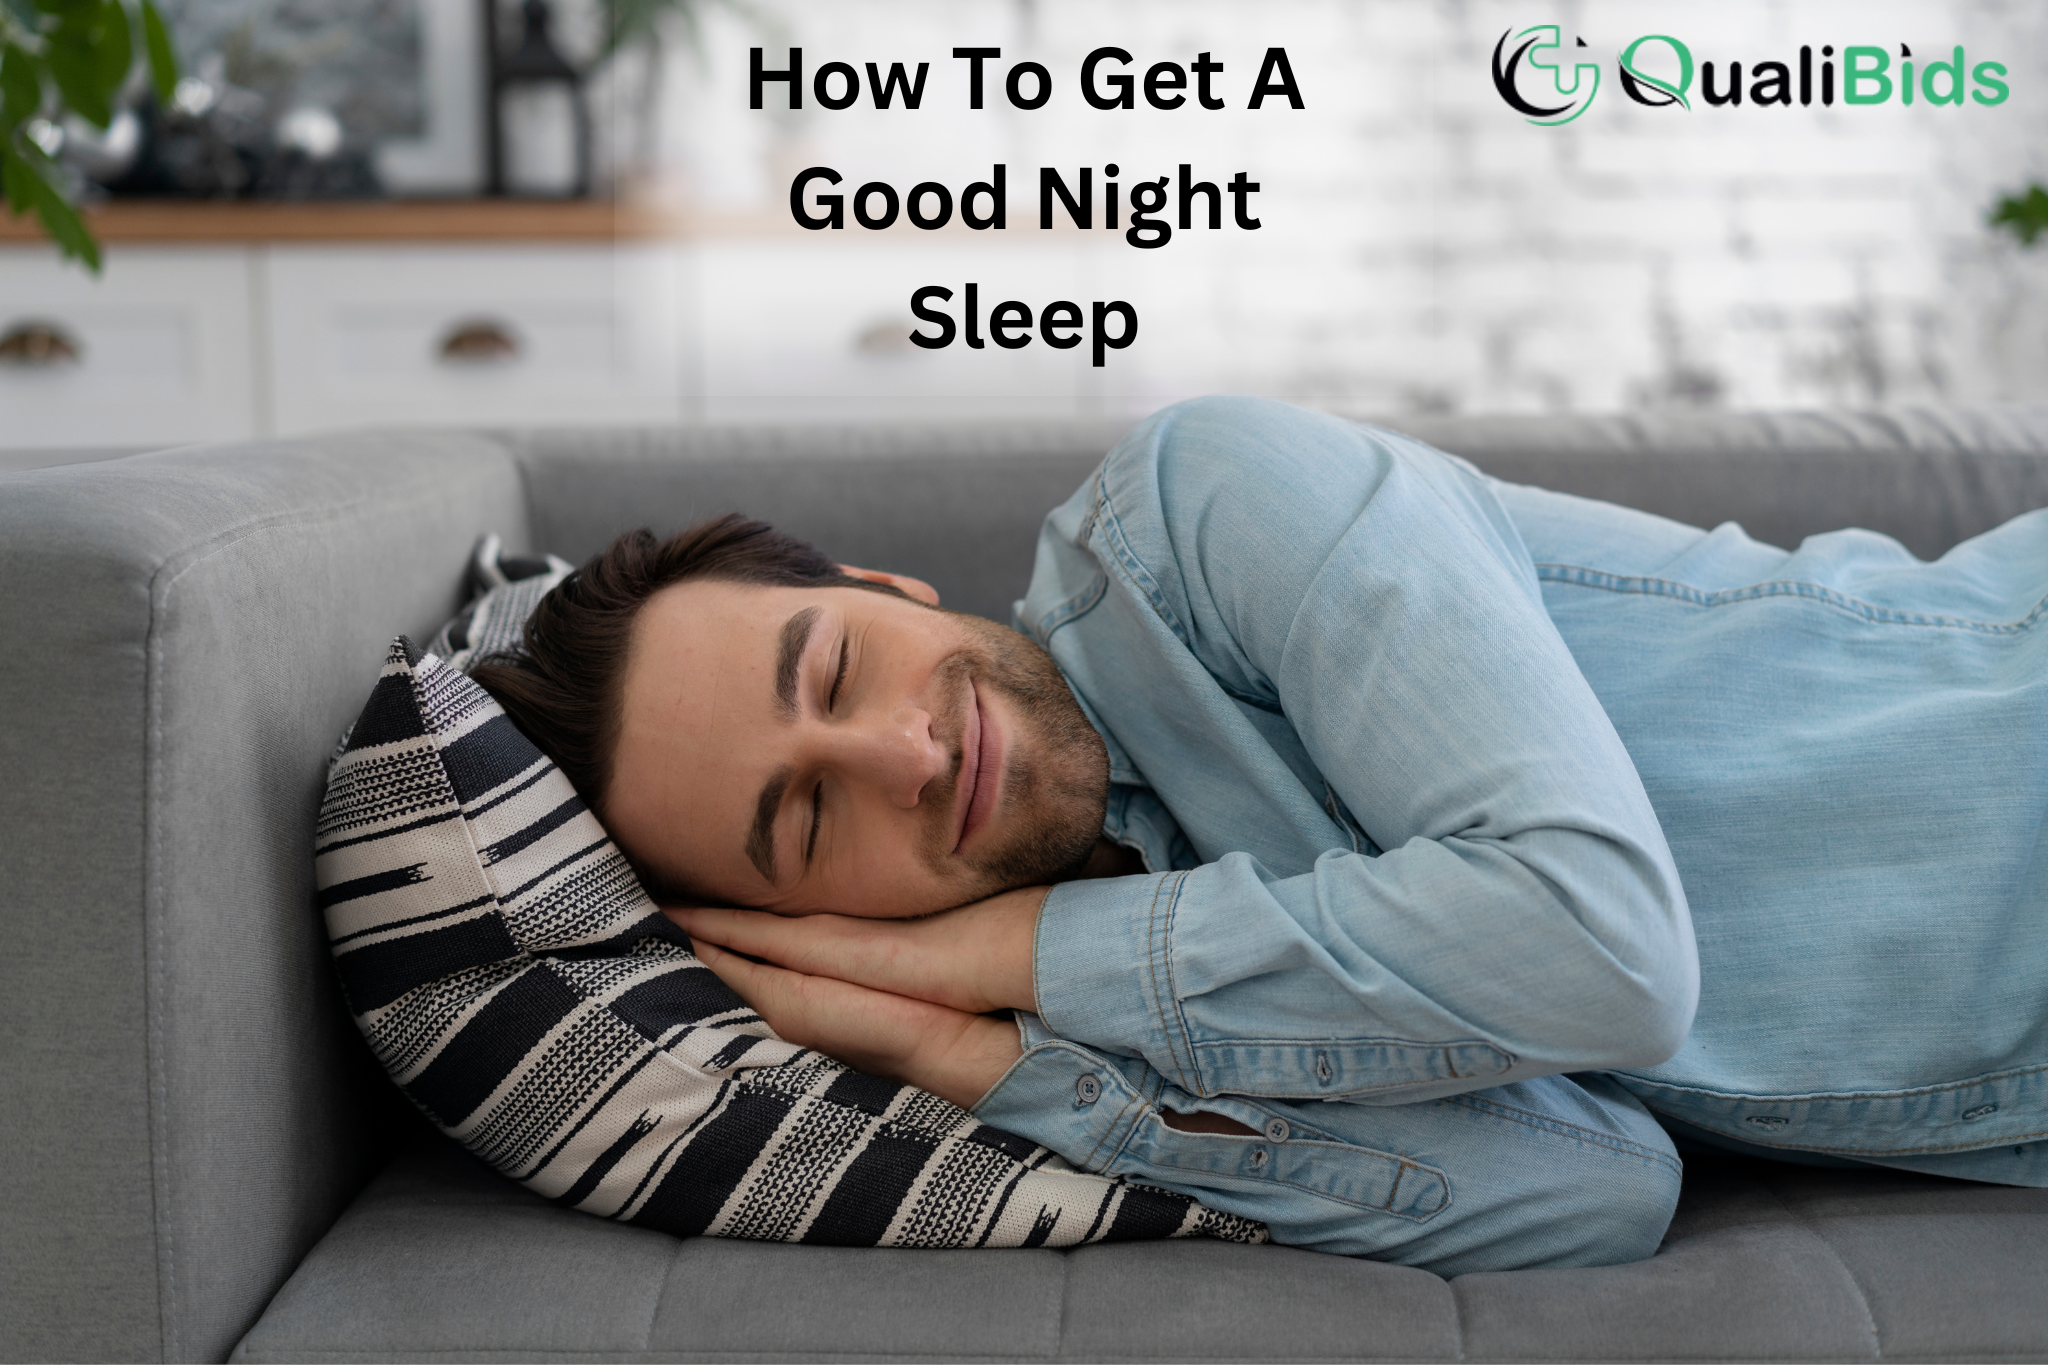 How To Get A Good Night Sleep: Tips For People With Sleep Disorders